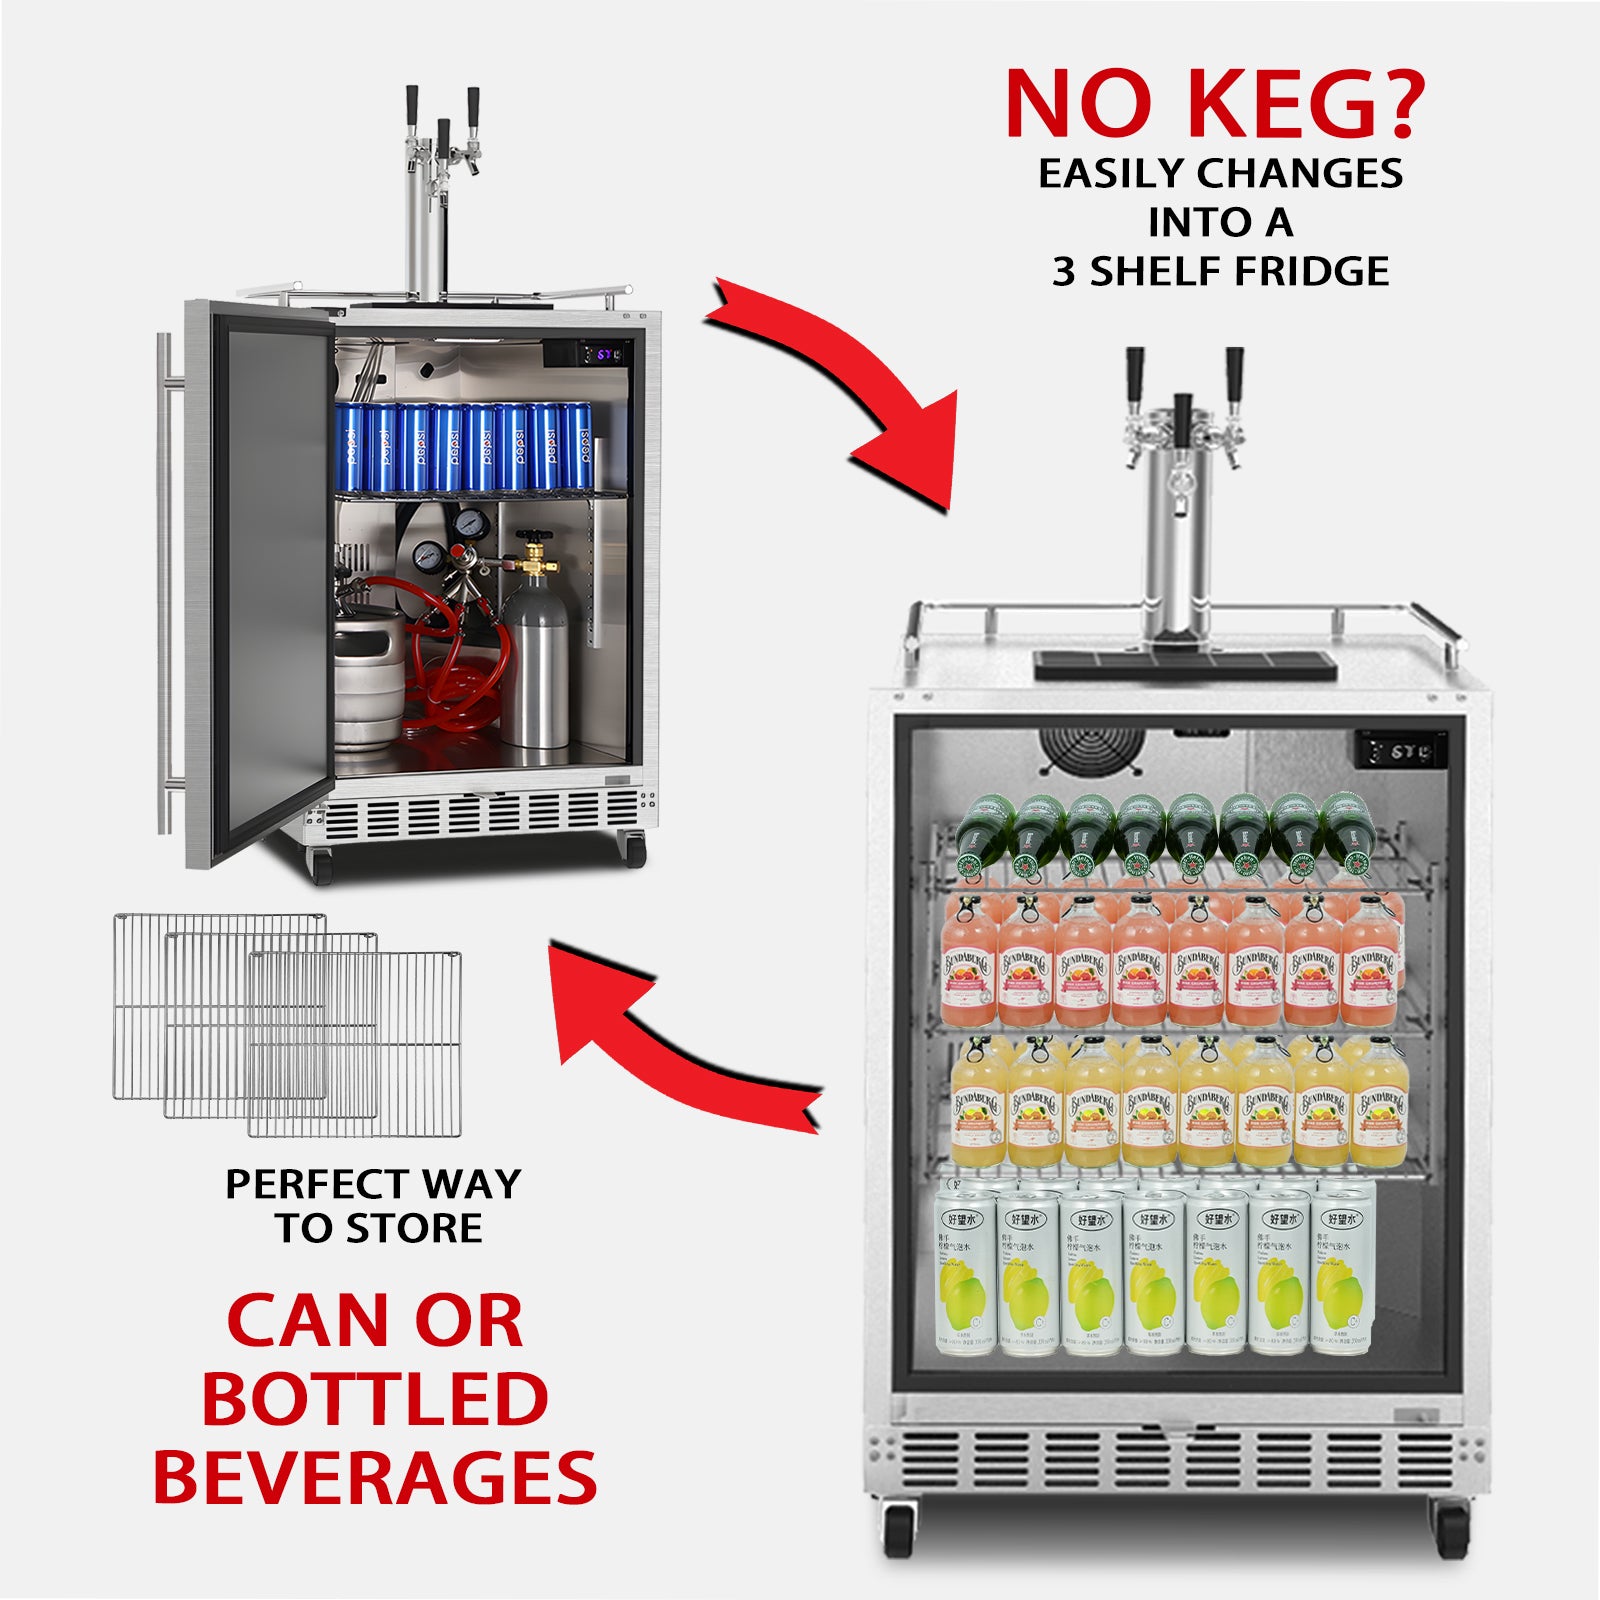 Side view of a 6.04 Cu Ft Undercounter Outdoor Refrigerator Kegerator with an open door, revealing interior space equipped with a keg and gas tank placed in the upper left corner. In the lower right corner is a front view of another 6.04 Cu Ft Undercounter Outdoor Refrigerator Kegerator, showing interior space with 3 wire shelves stocked full of beverage drinks. Between these two is an arrow element and description lines highlighting the switchable feature of the product